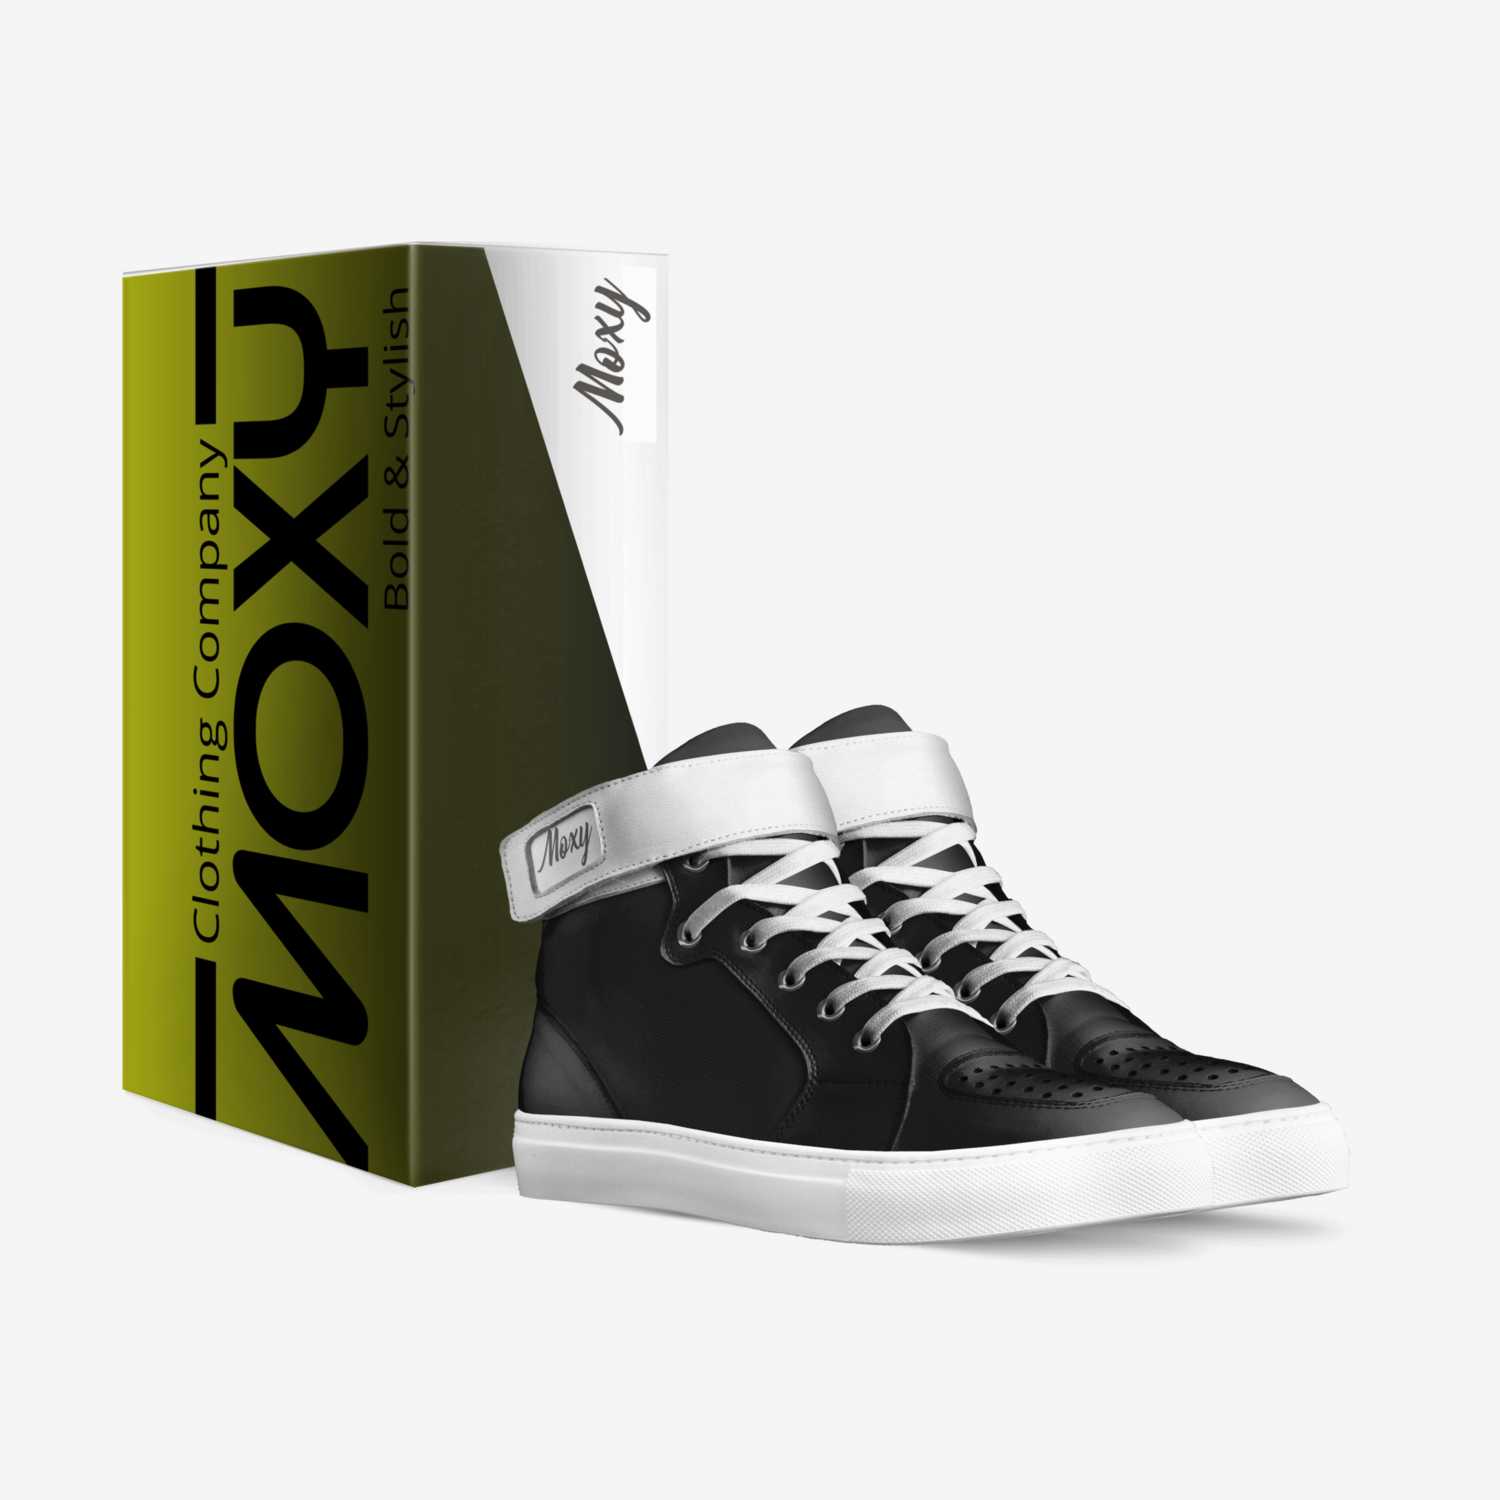 Moxy Elites custom made in Italy shoes by Moxy Clothing Co. | Box view